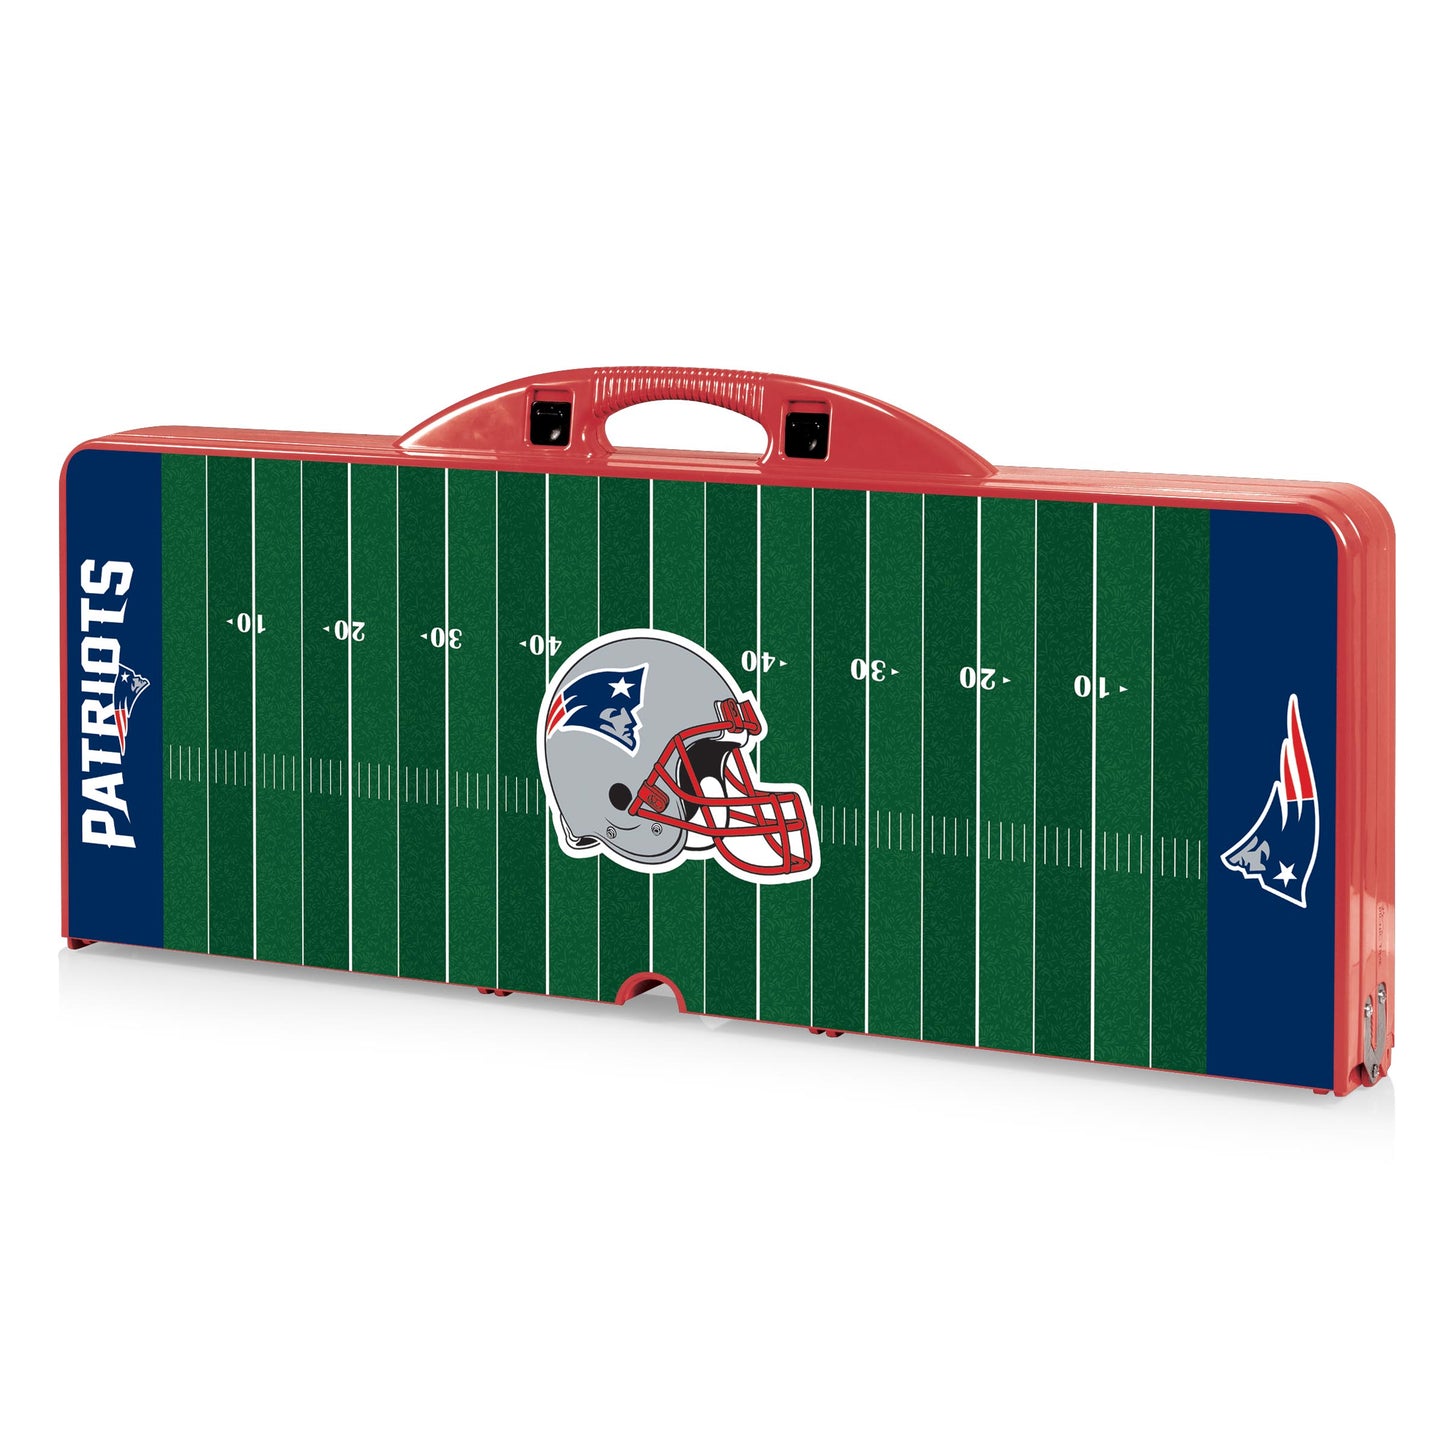 New England Patriots - Picnic Table Portable Folding Table with Seats - Football Field Style